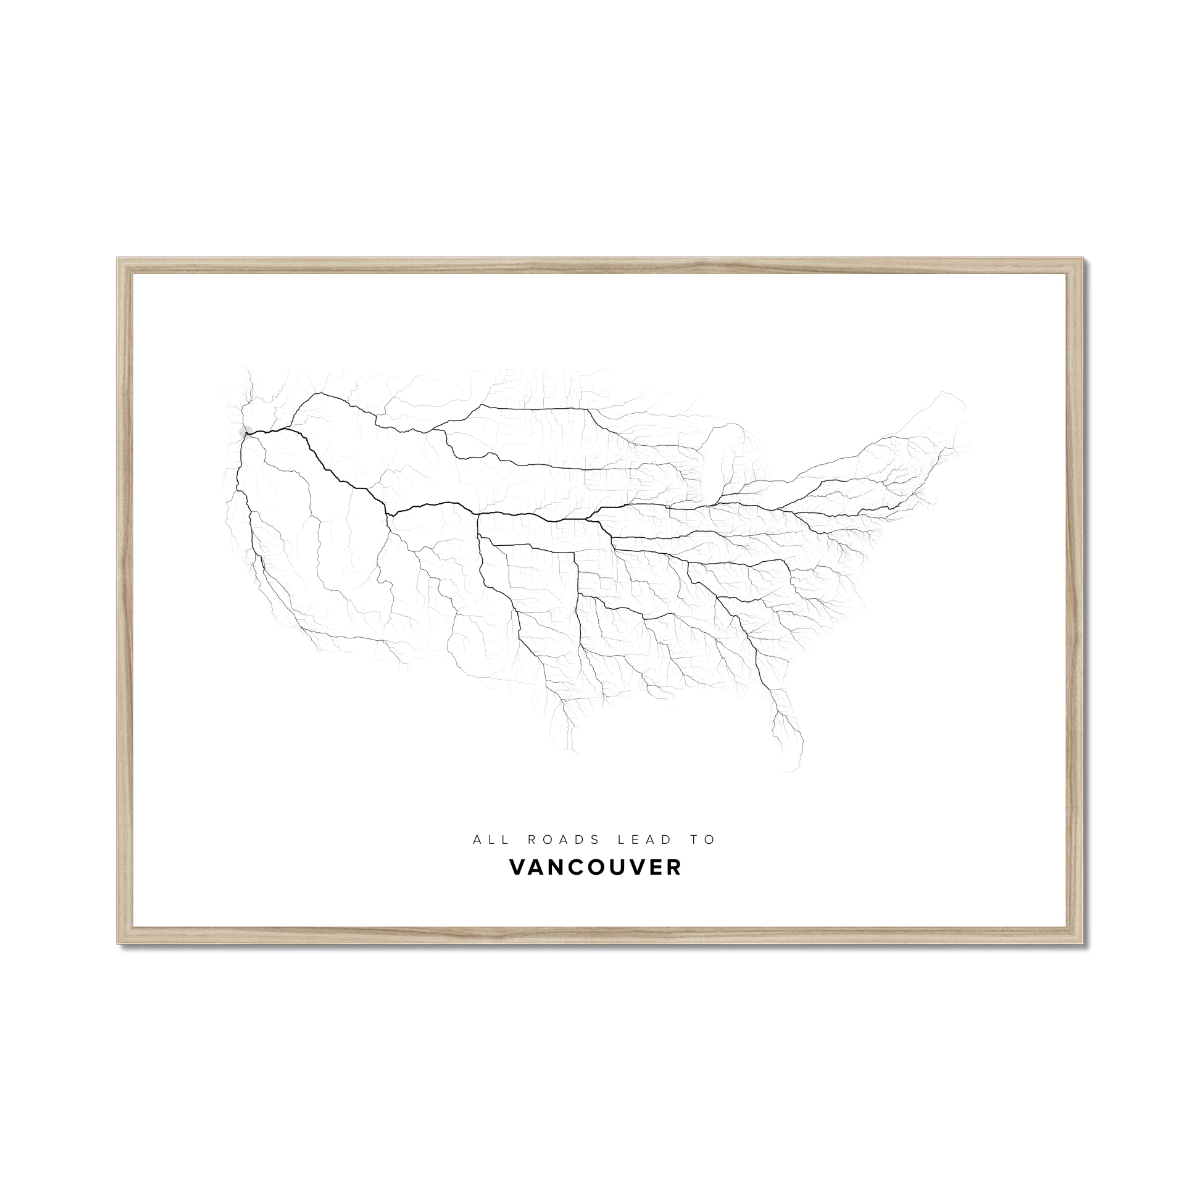 All roads lead to Vancouver (United States of America) Fine Art Map Print